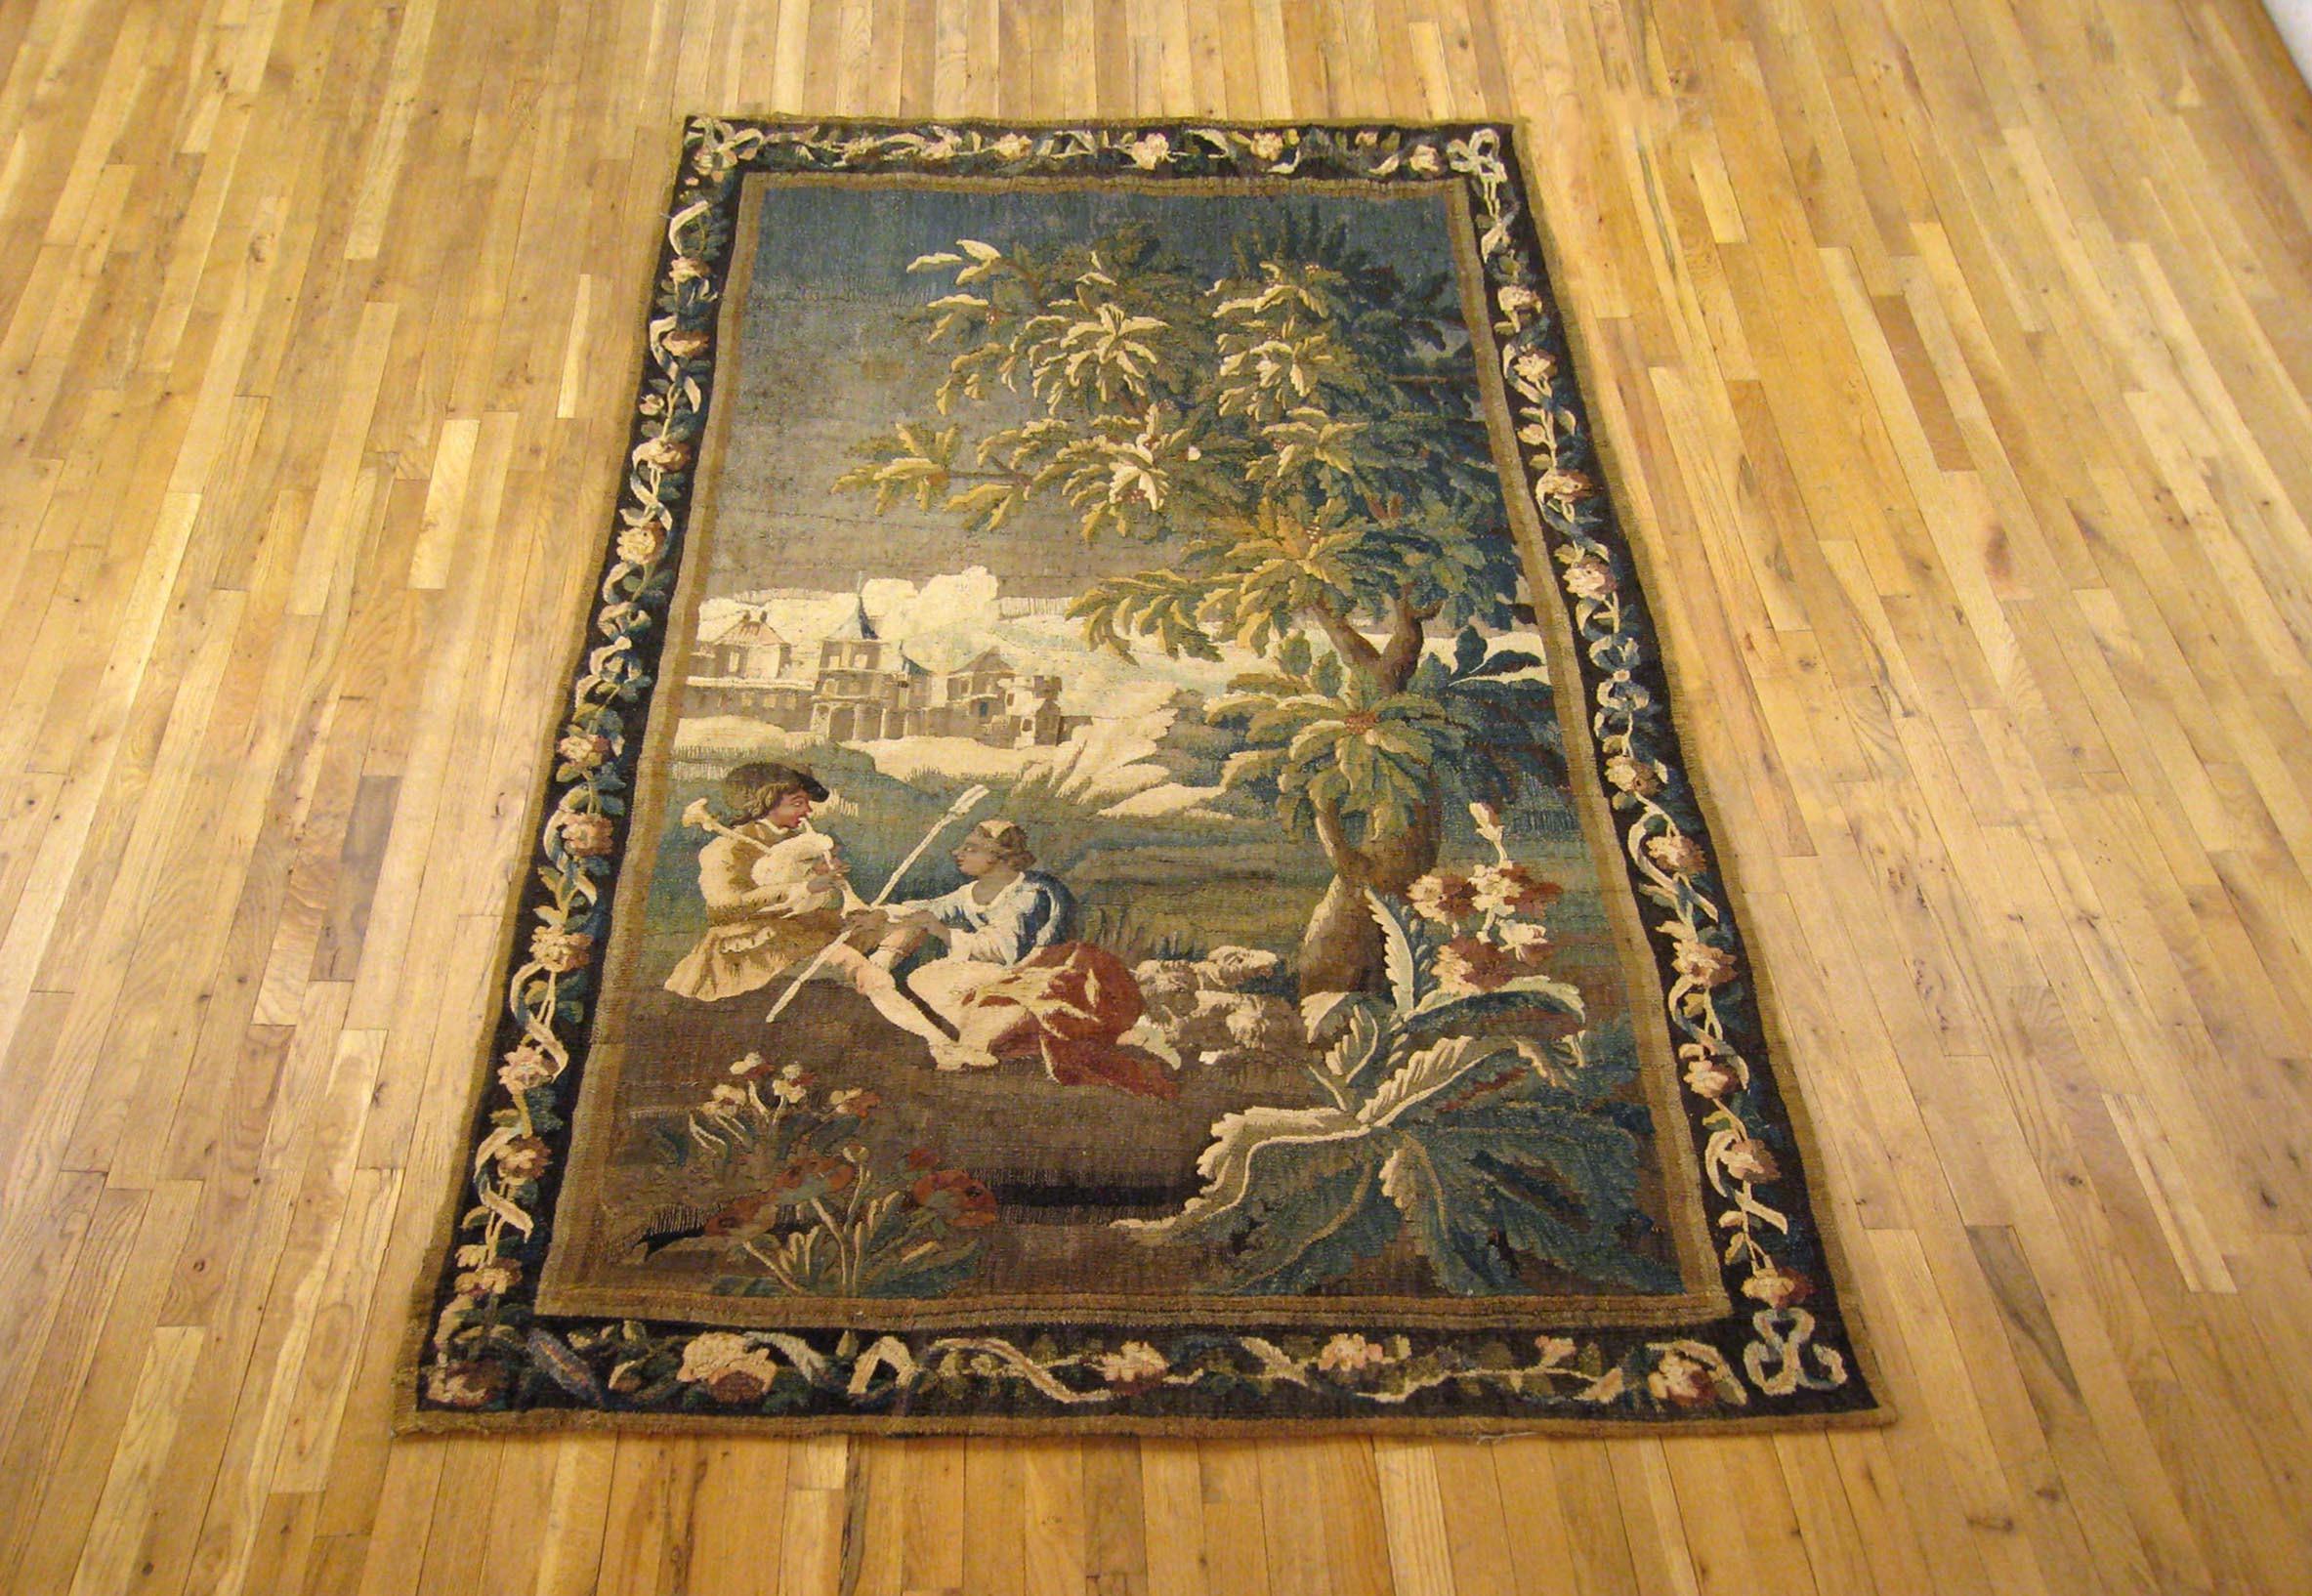 A French Felletin pastoral tapestry panel from the first half of the 18th century, depicting a seated youth playing the bagpipes and courting a seated young woman, flanked by two sheep, within an extensive landscape with a tree to the right-hand